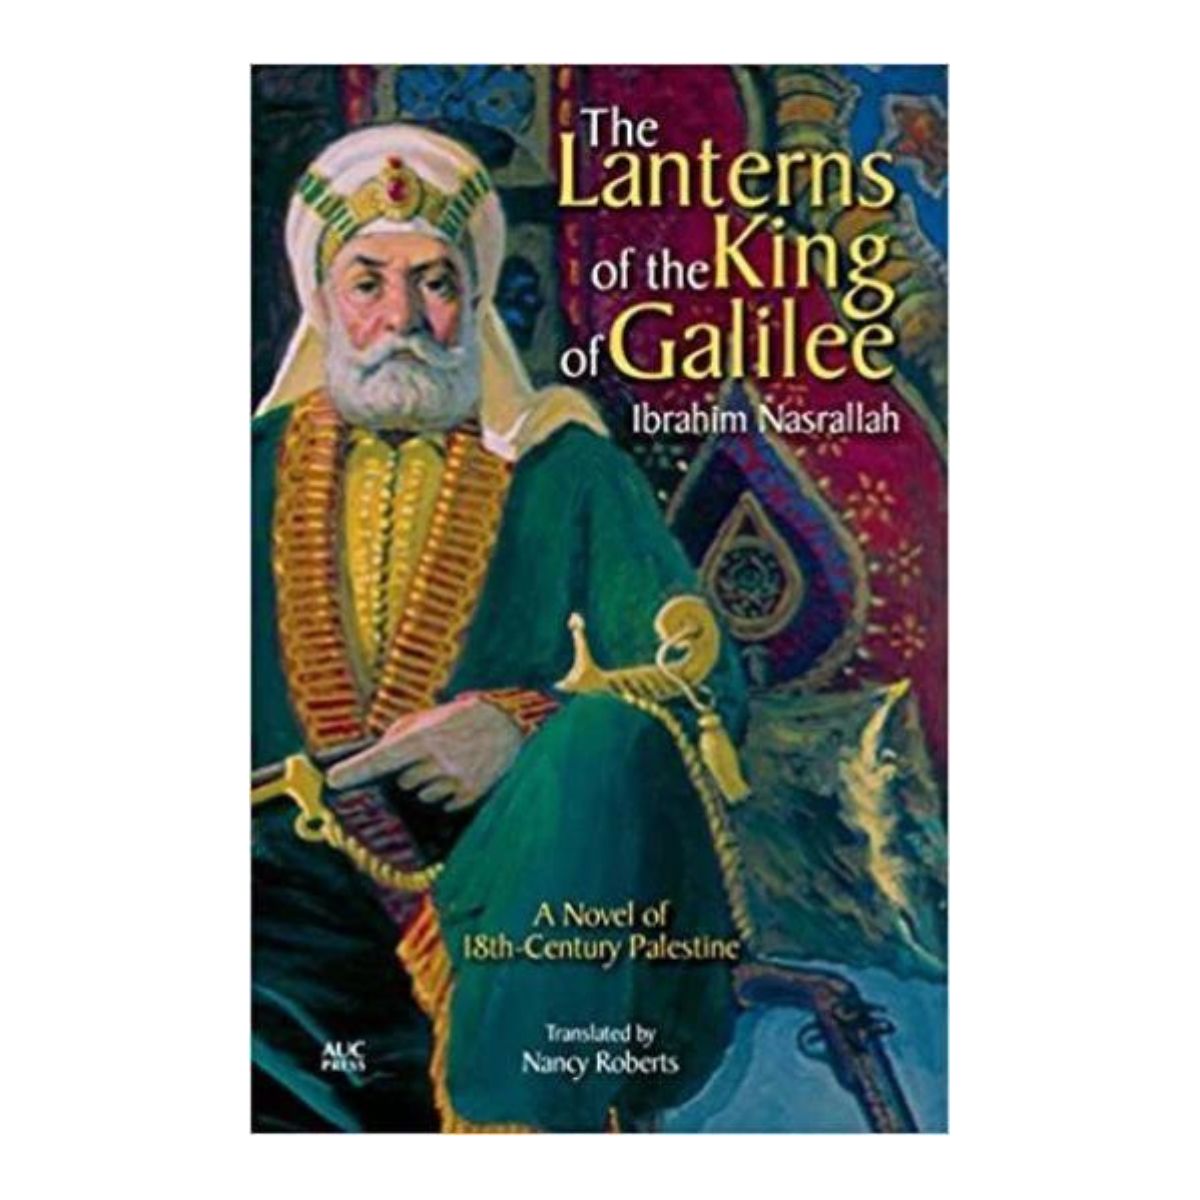 The Lanterns of the King of Galilee